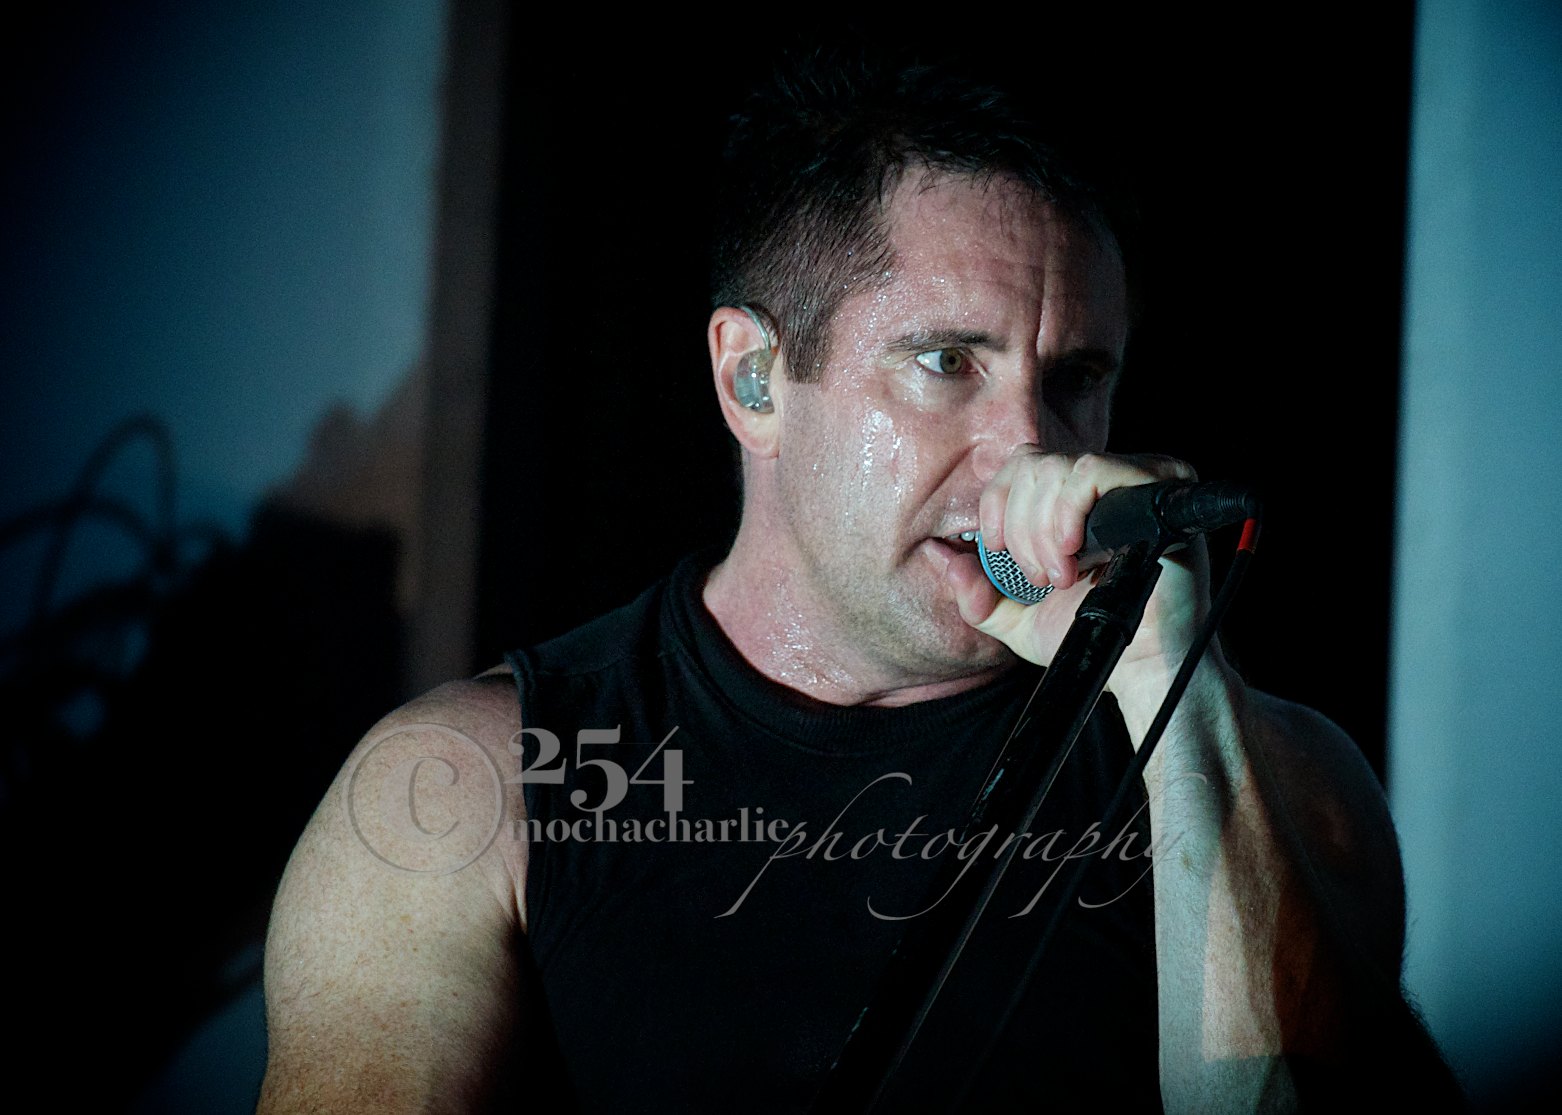 Nine Inch Nails at White River Ampitheatre (Photo by Mocha Charlie)